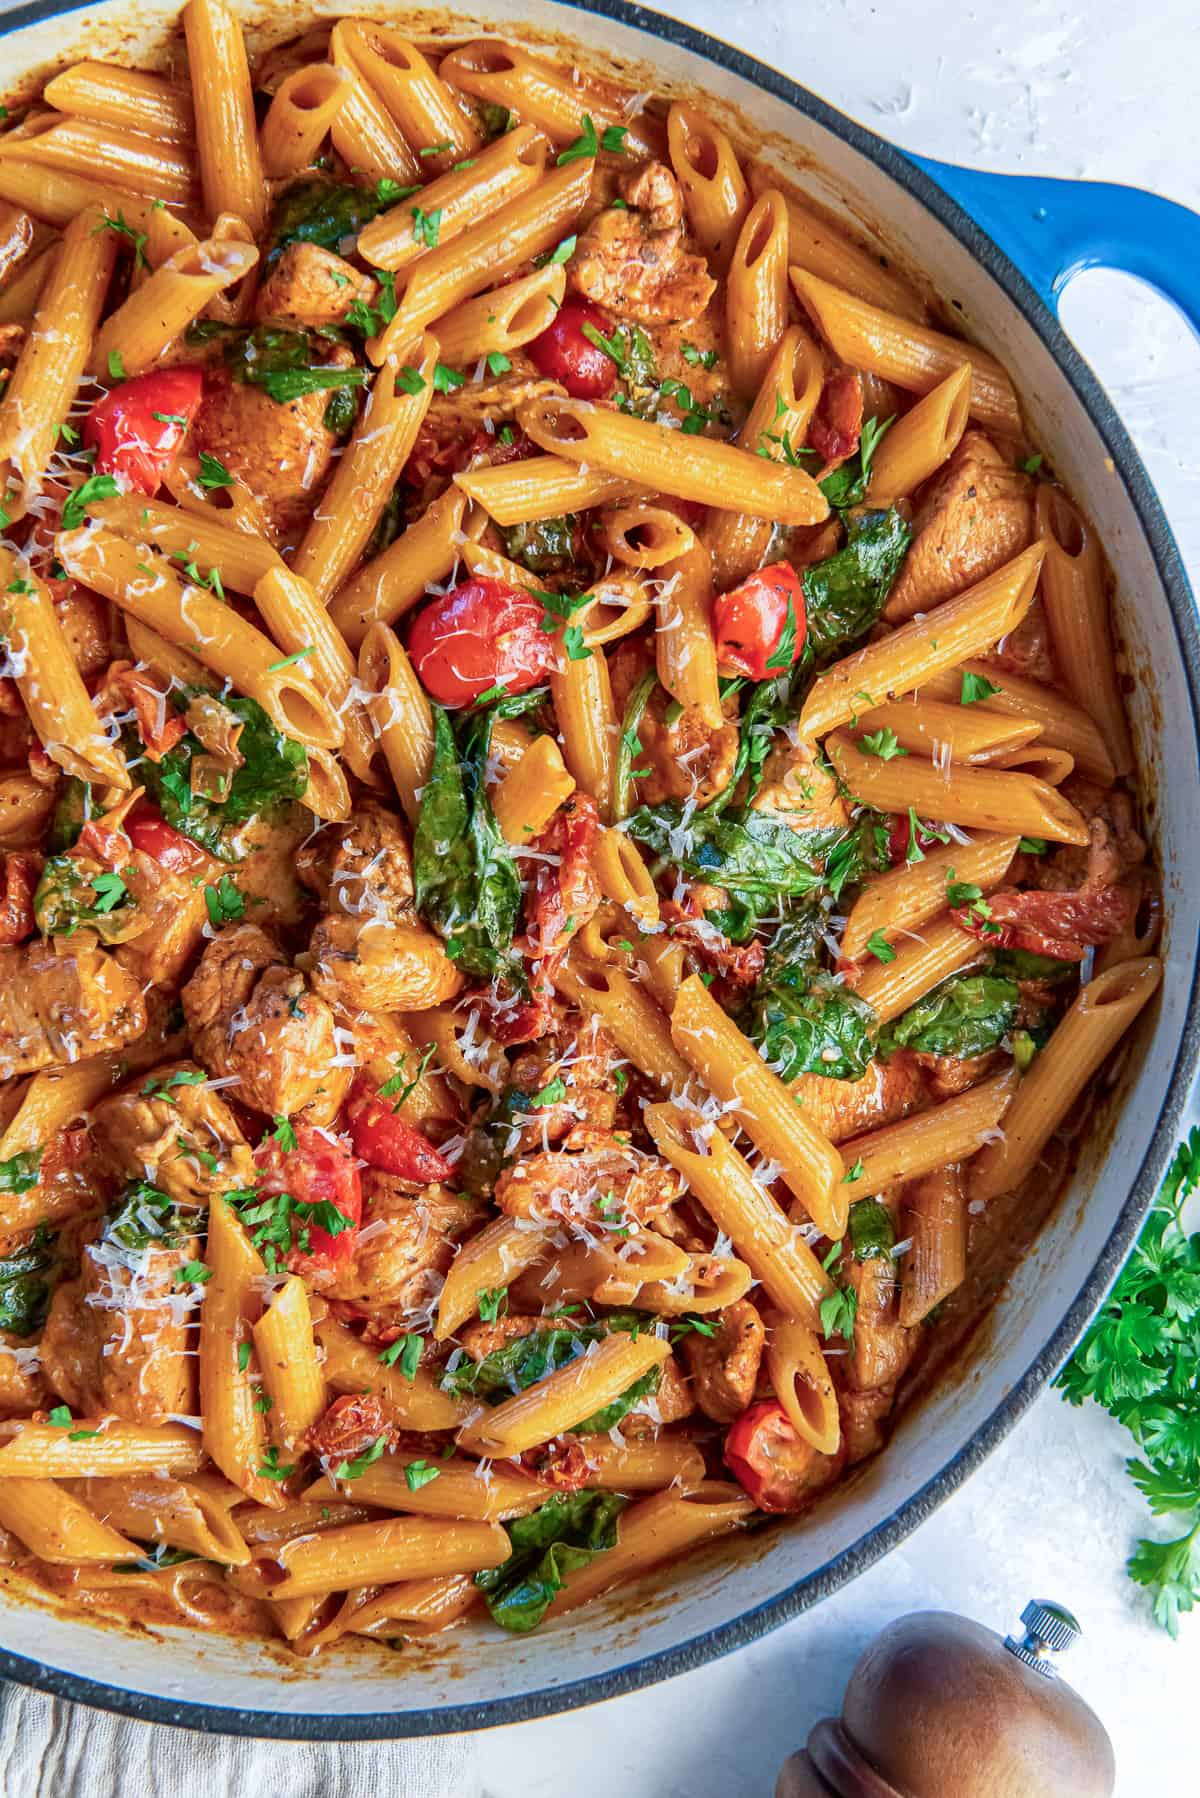 A skillet full of pasta with chicken, sundried tomatoes, cherry tomatoes, and spinach.